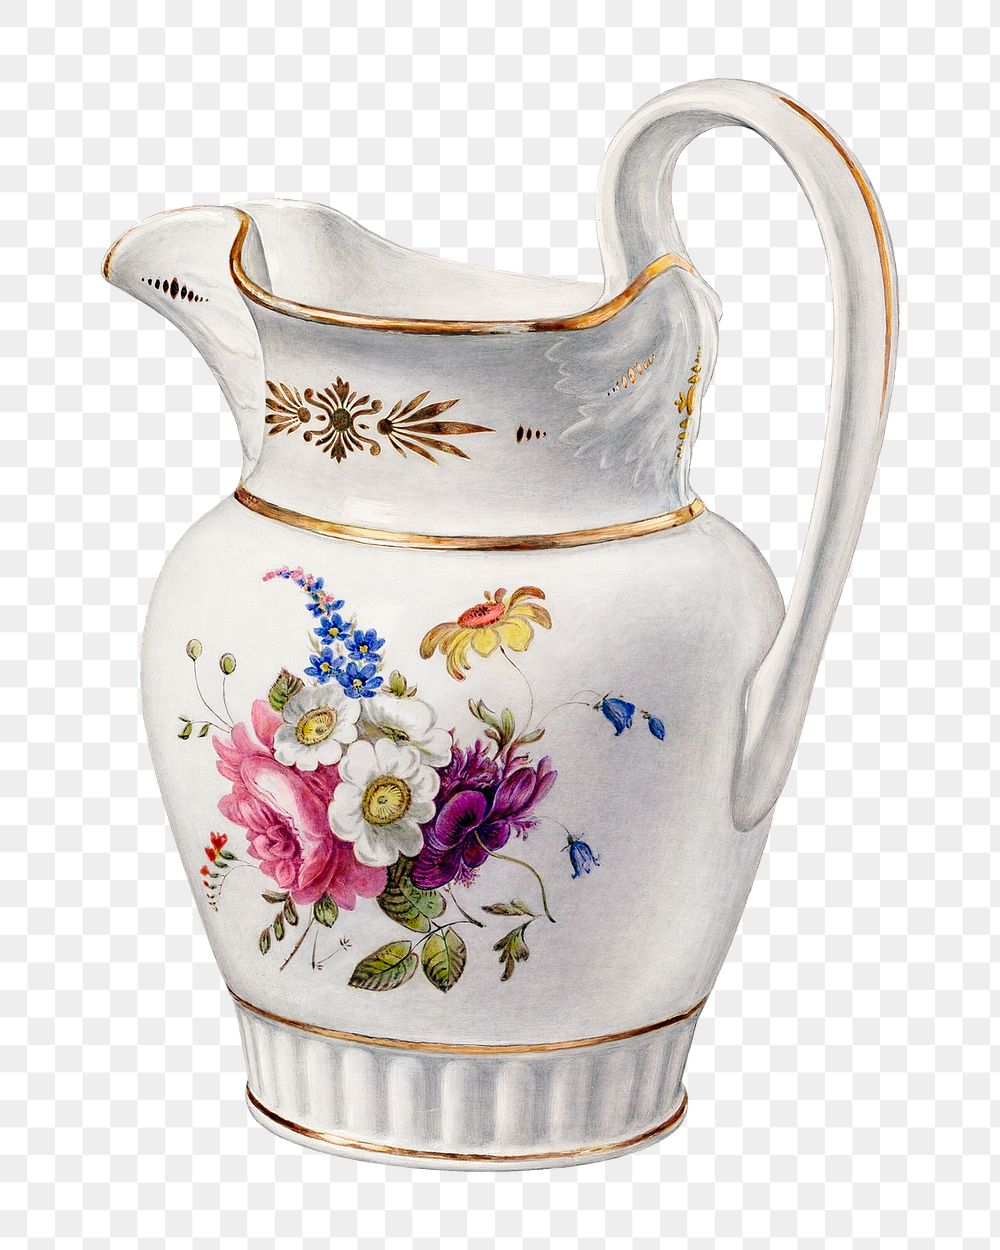 Vintage floral pitcher png illustration, remixed from the artwork by Paul Ward